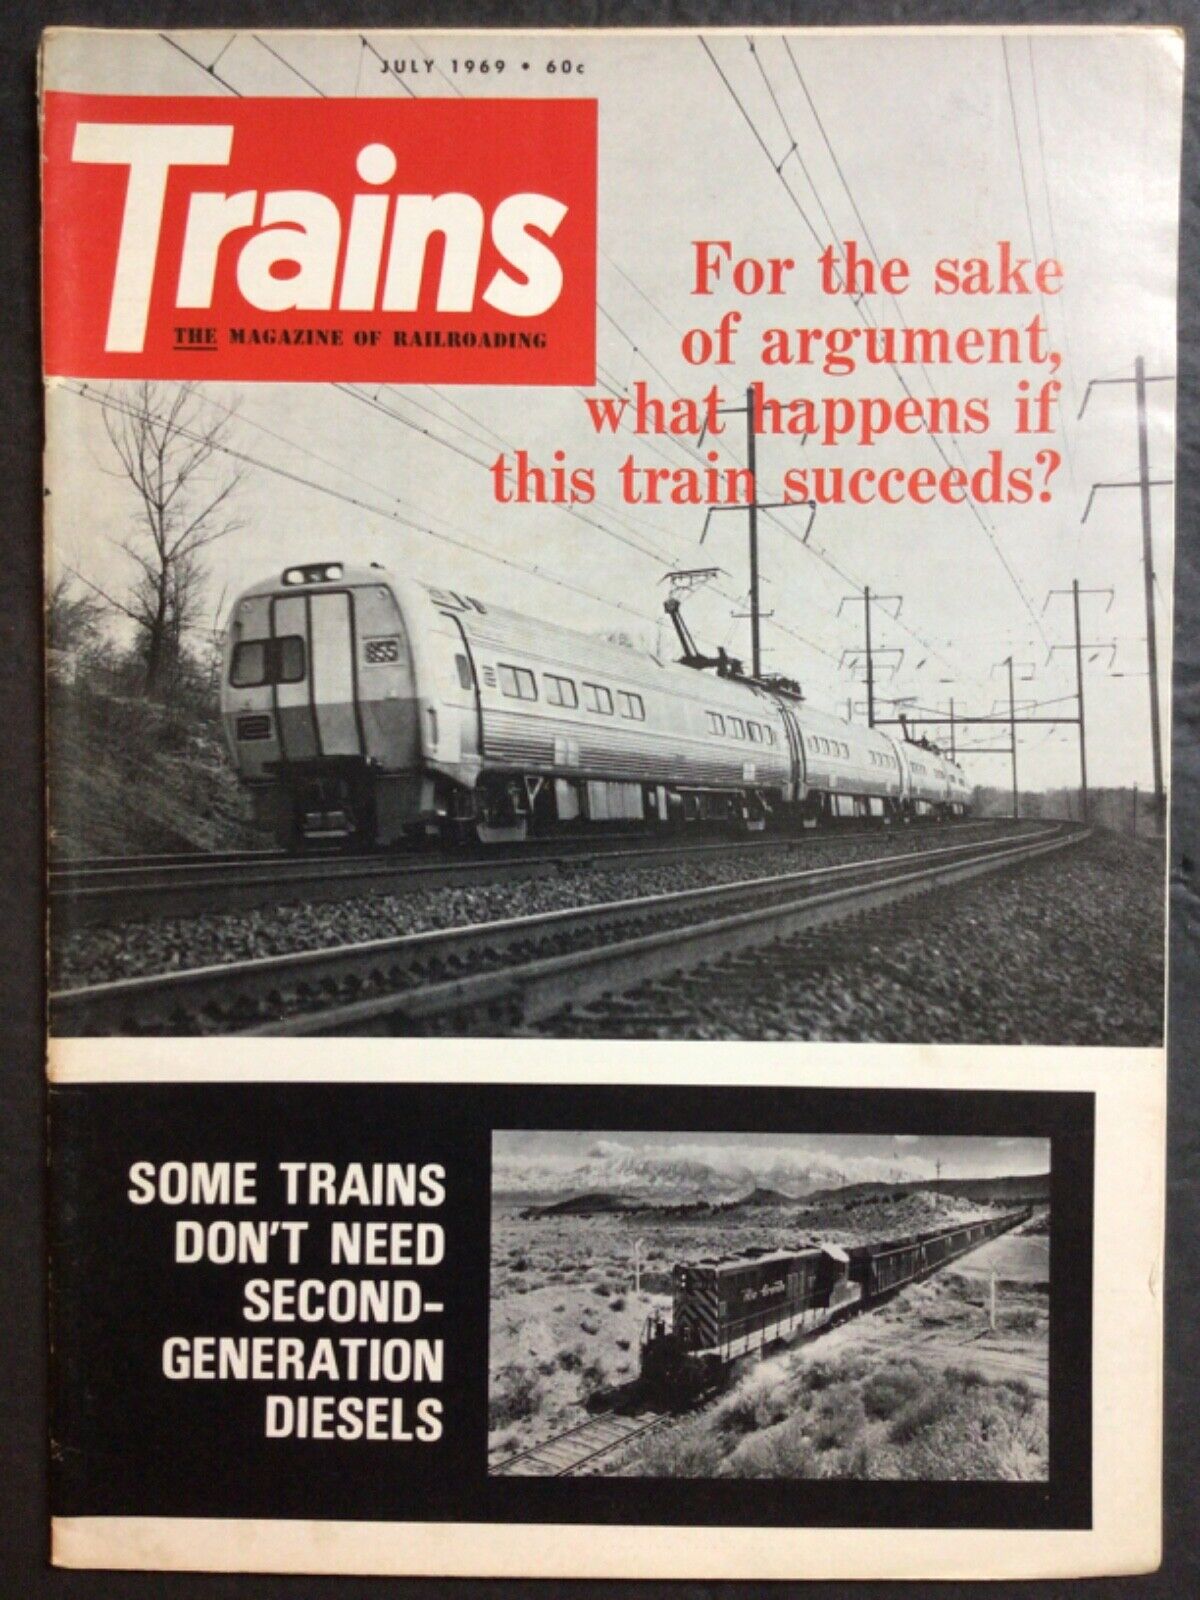 TRAINS - The Magazine of Railroading - July 1969 -  EXCELLENT CONDITION